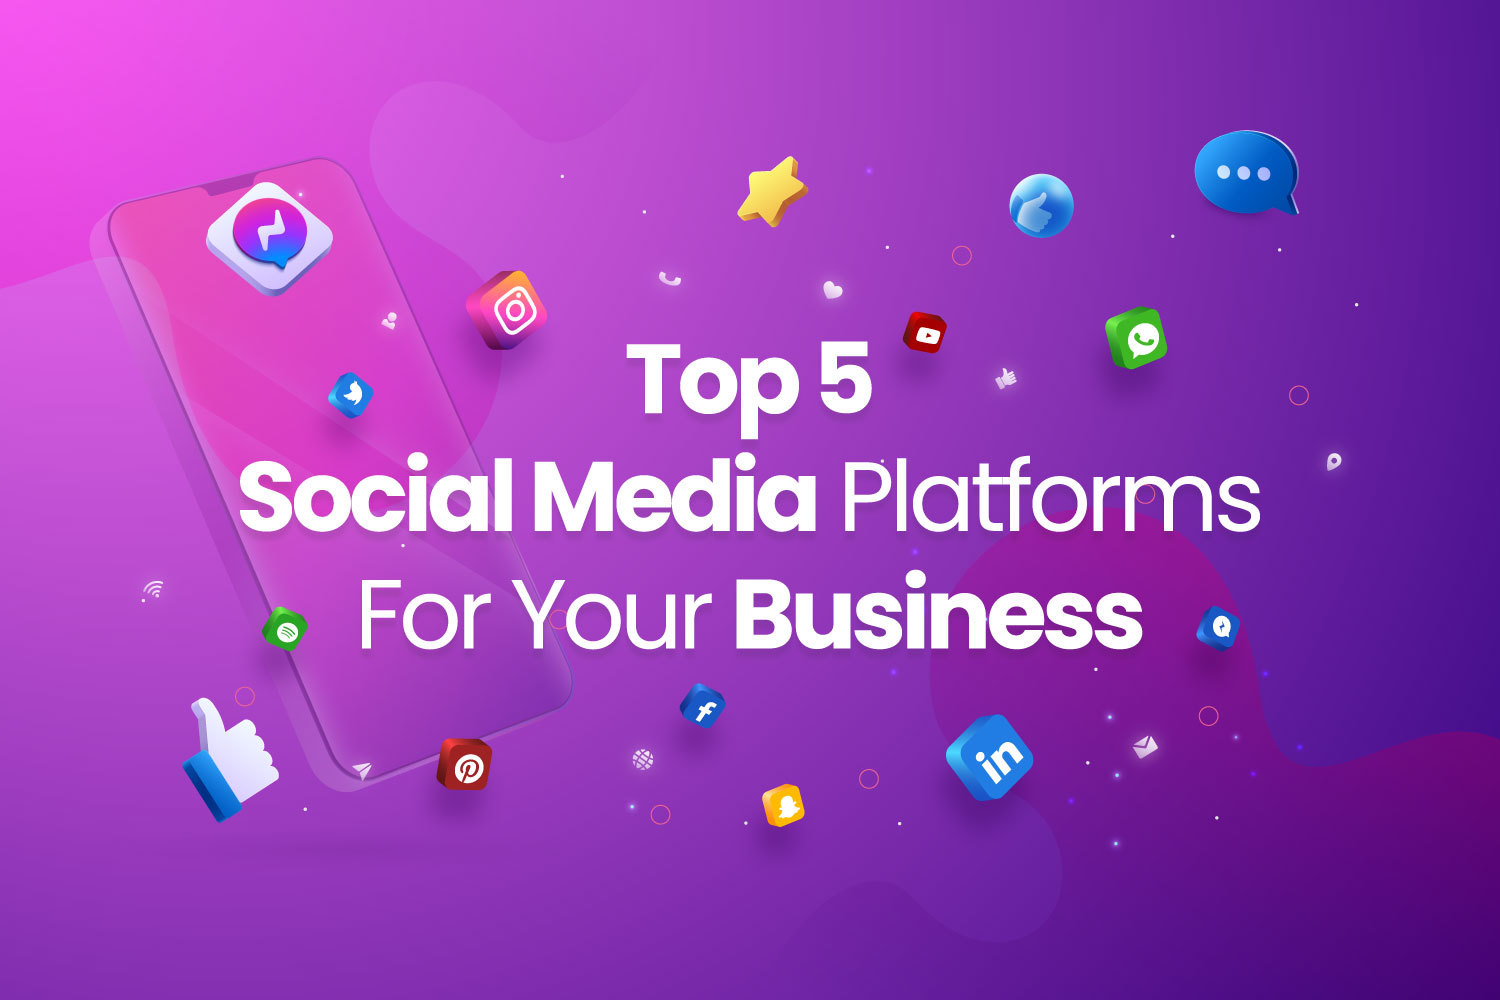 Top 5 Social Media Platforms For Your Business Graphic